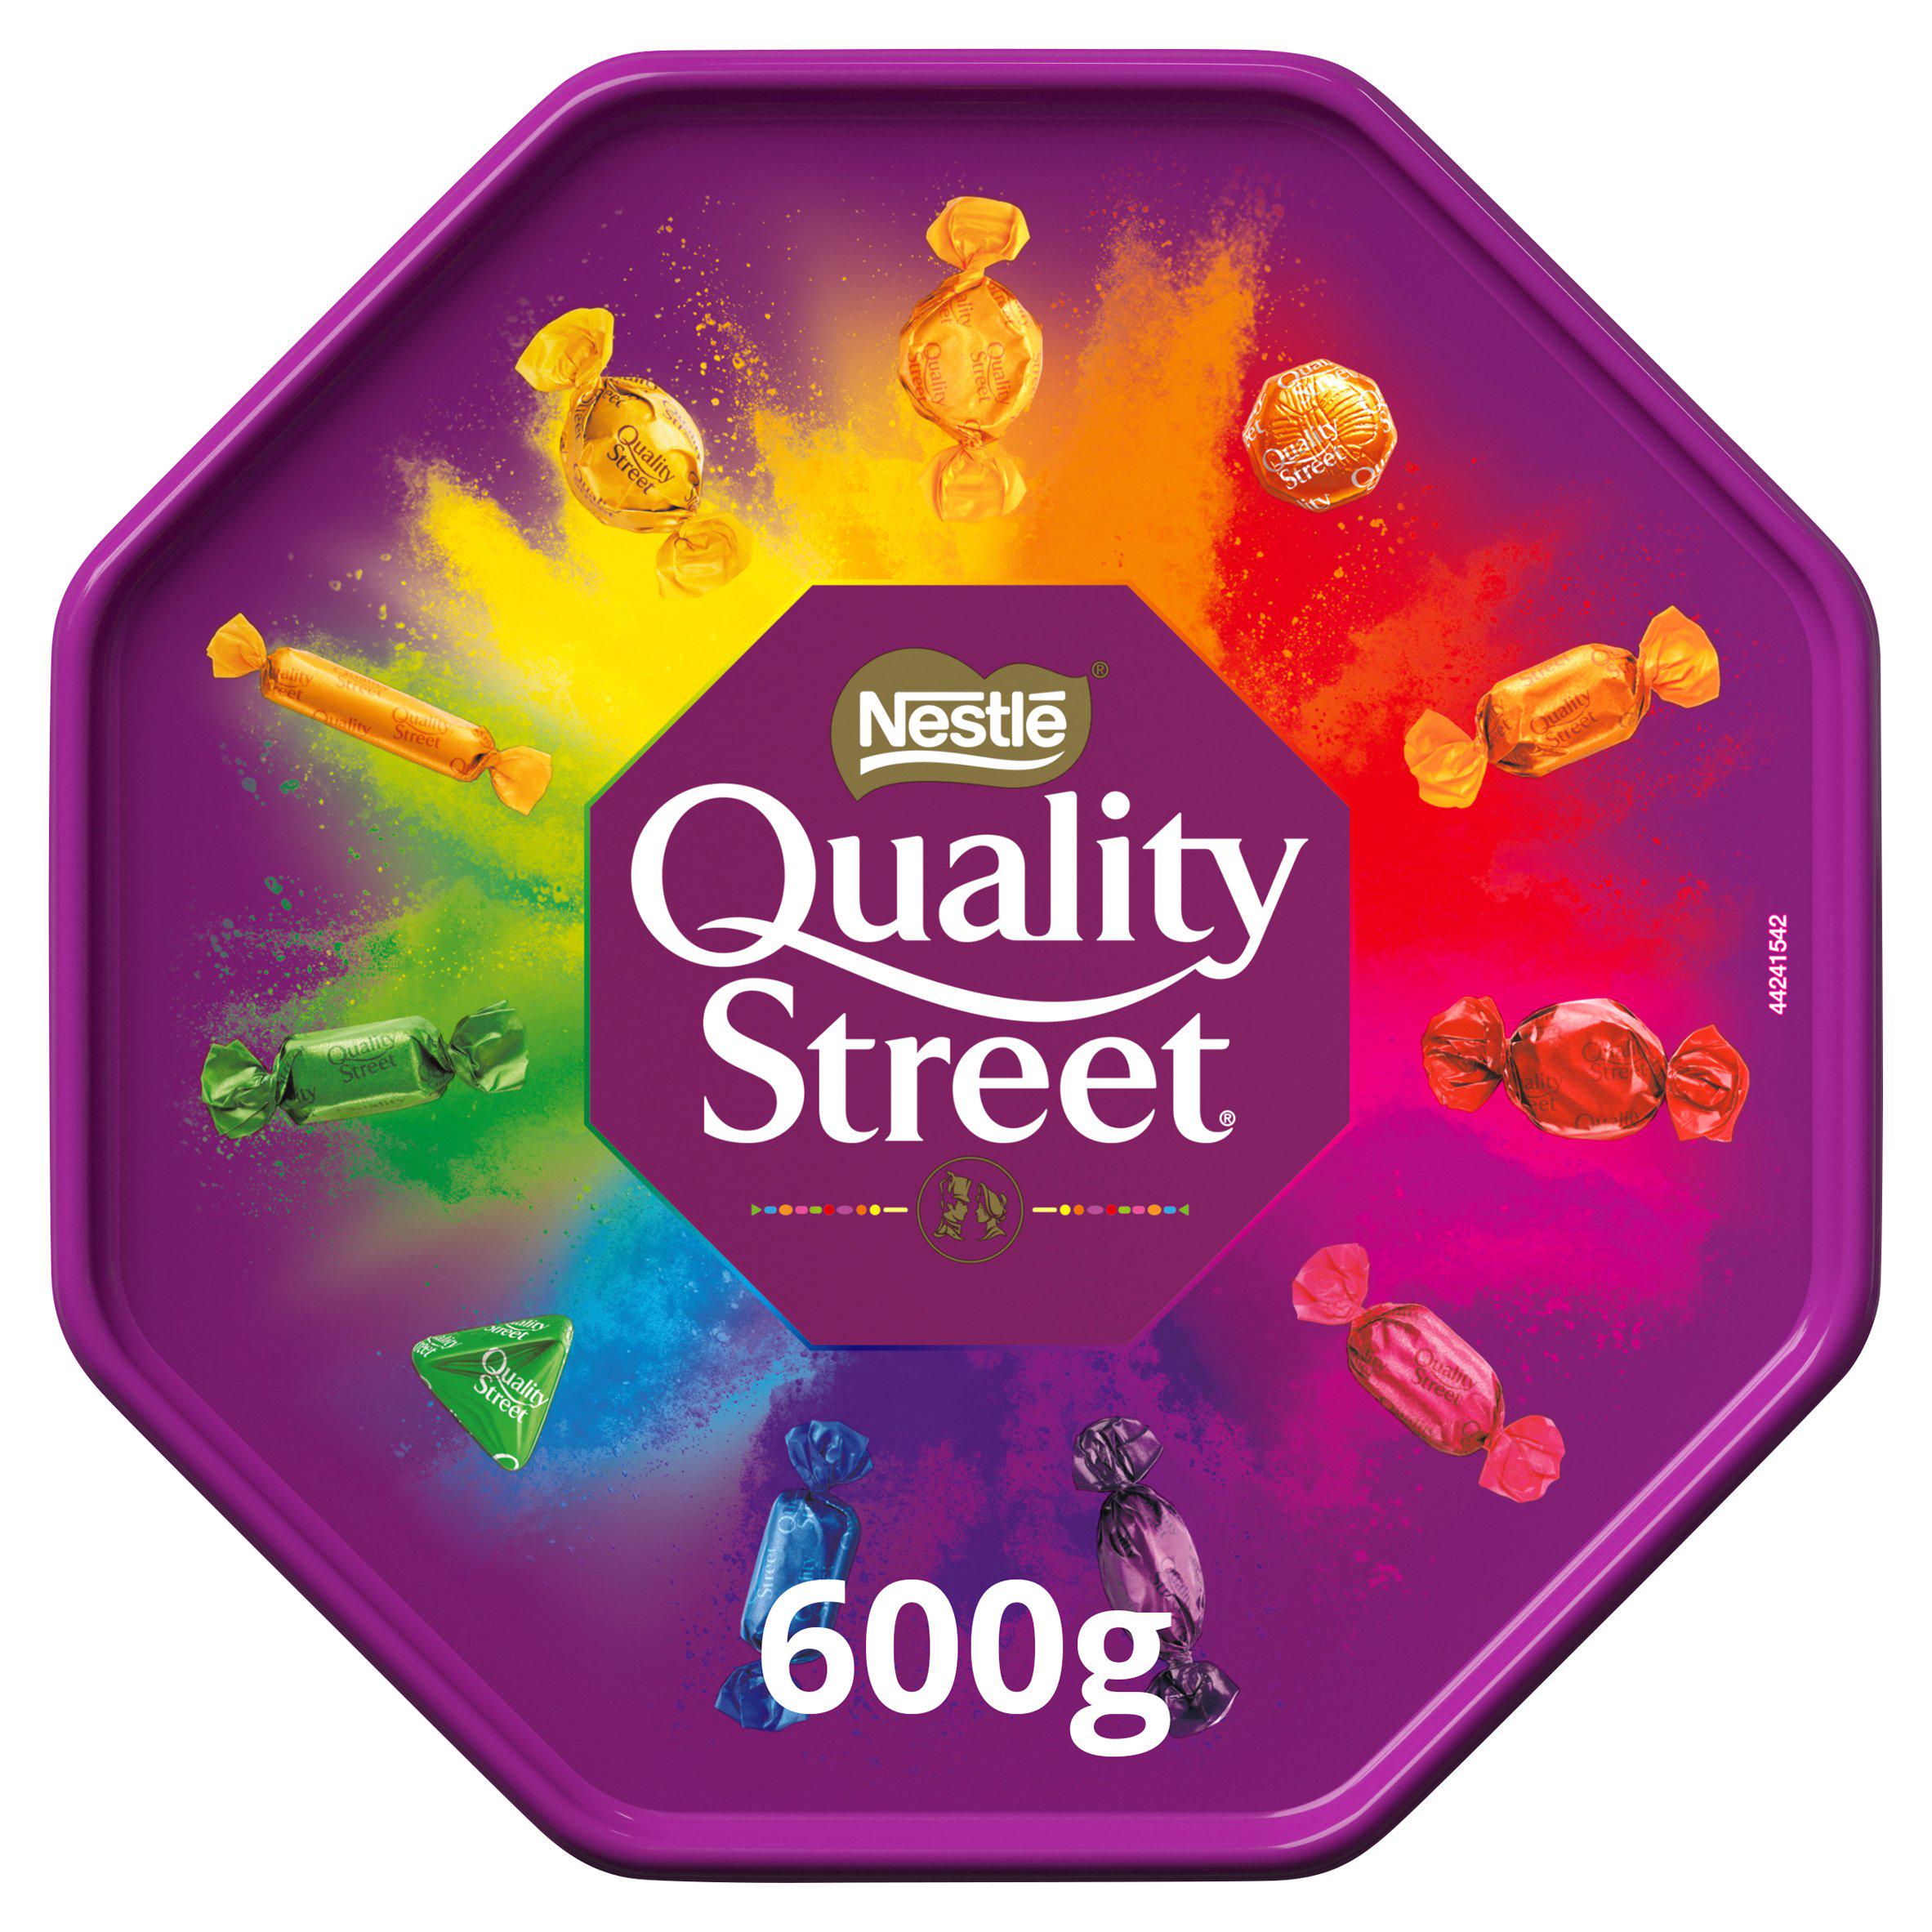 Quality Street fans get an apology after counting the chocolates in their Christmas tins If you had a feeling something was wrong with your tub of Quality Street, you were correct.